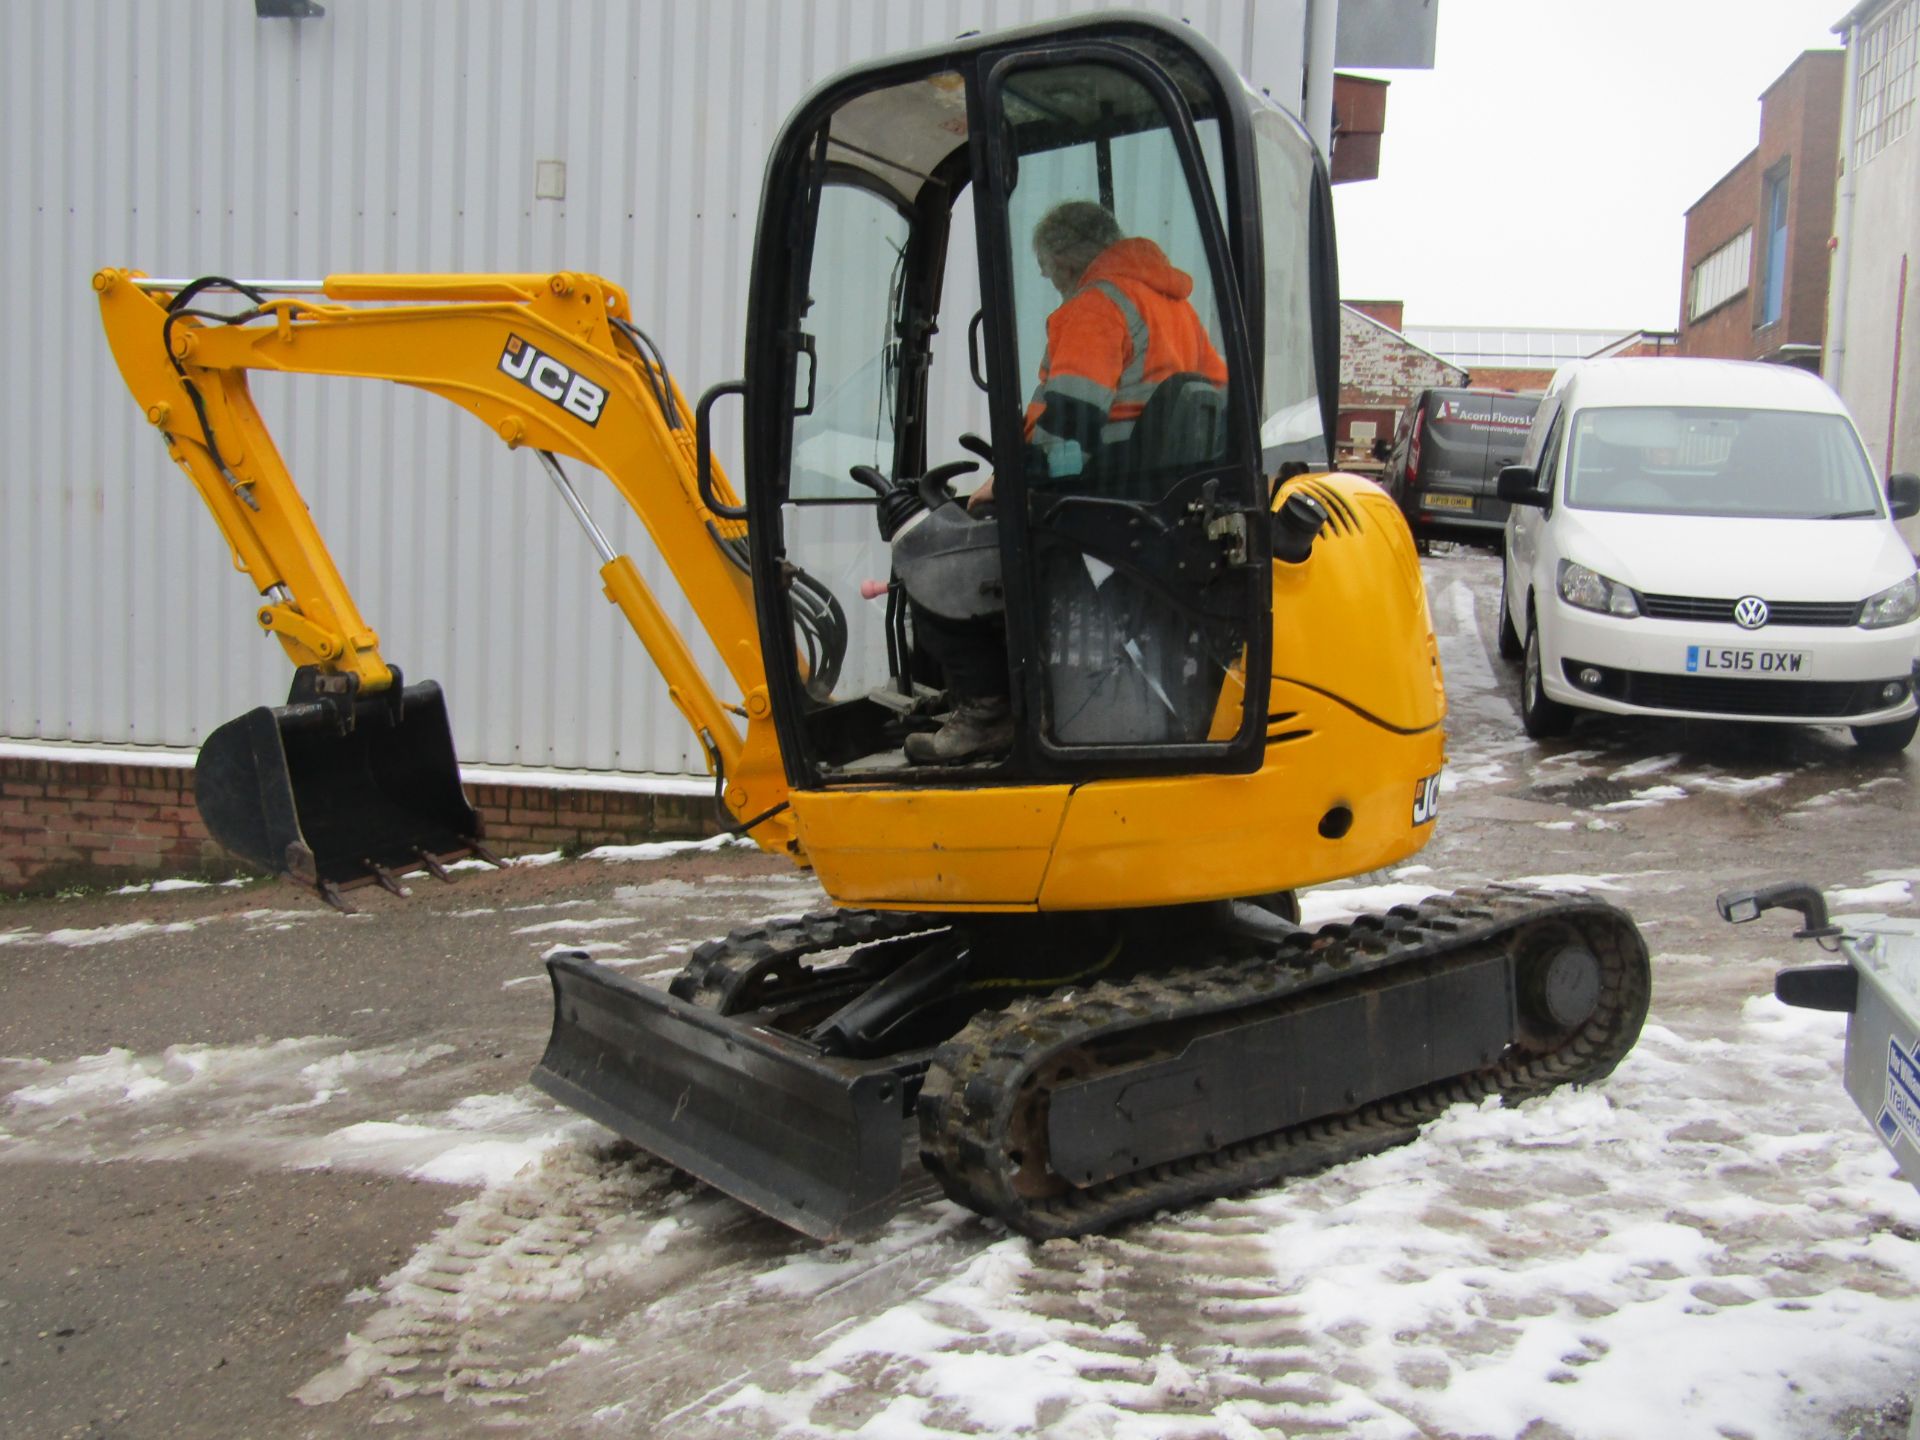 JCB 8025 TRACKED DIGGER / EXCAVATOR, SERIAL NUMBER 1226529, ZERO TAIL SWING, YEAR 2008 *PLUS VAT* - Image 4 of 10